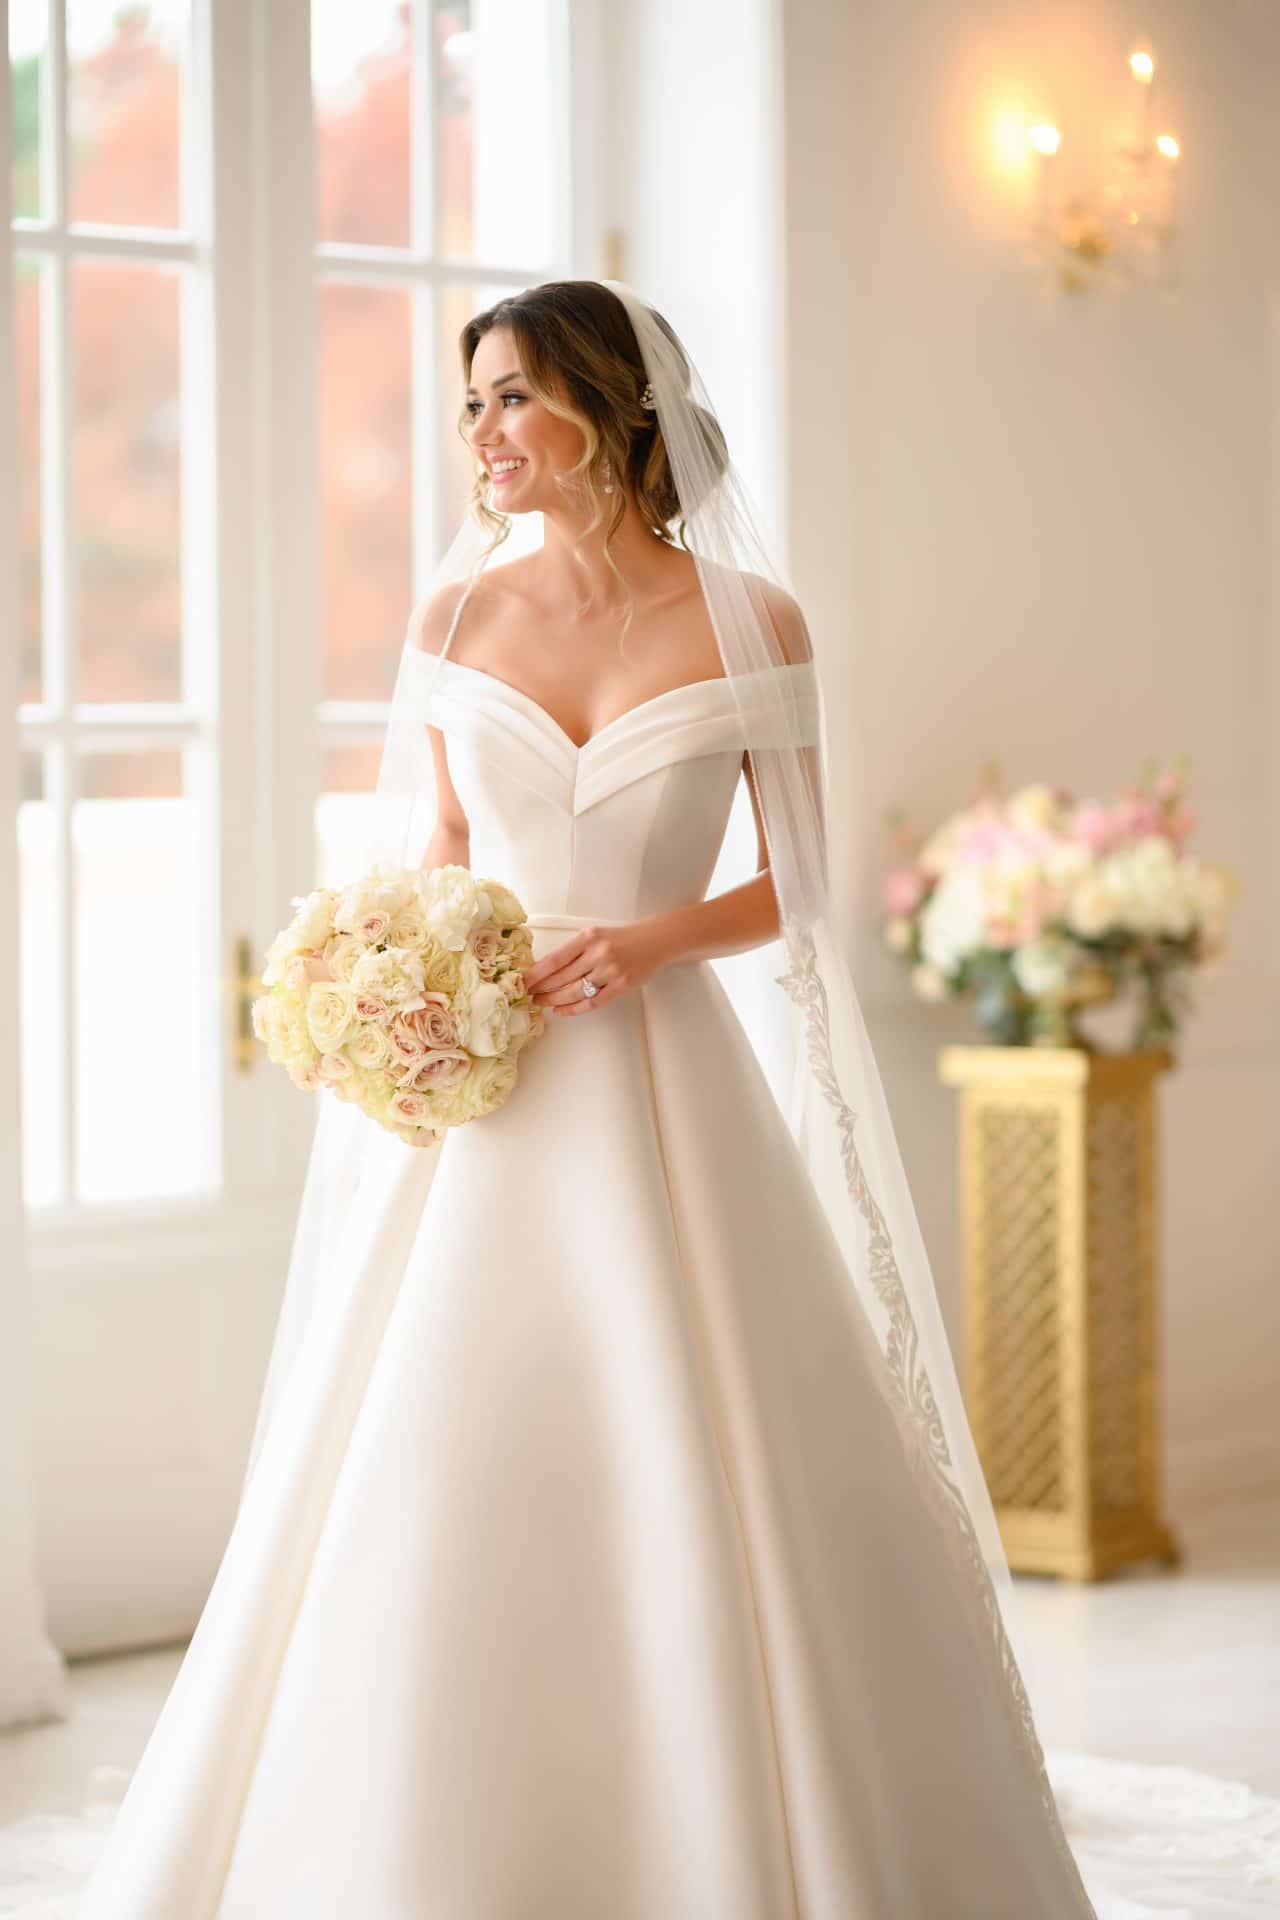 Plus Size Wedding Dresses at Shropshire Country Brides